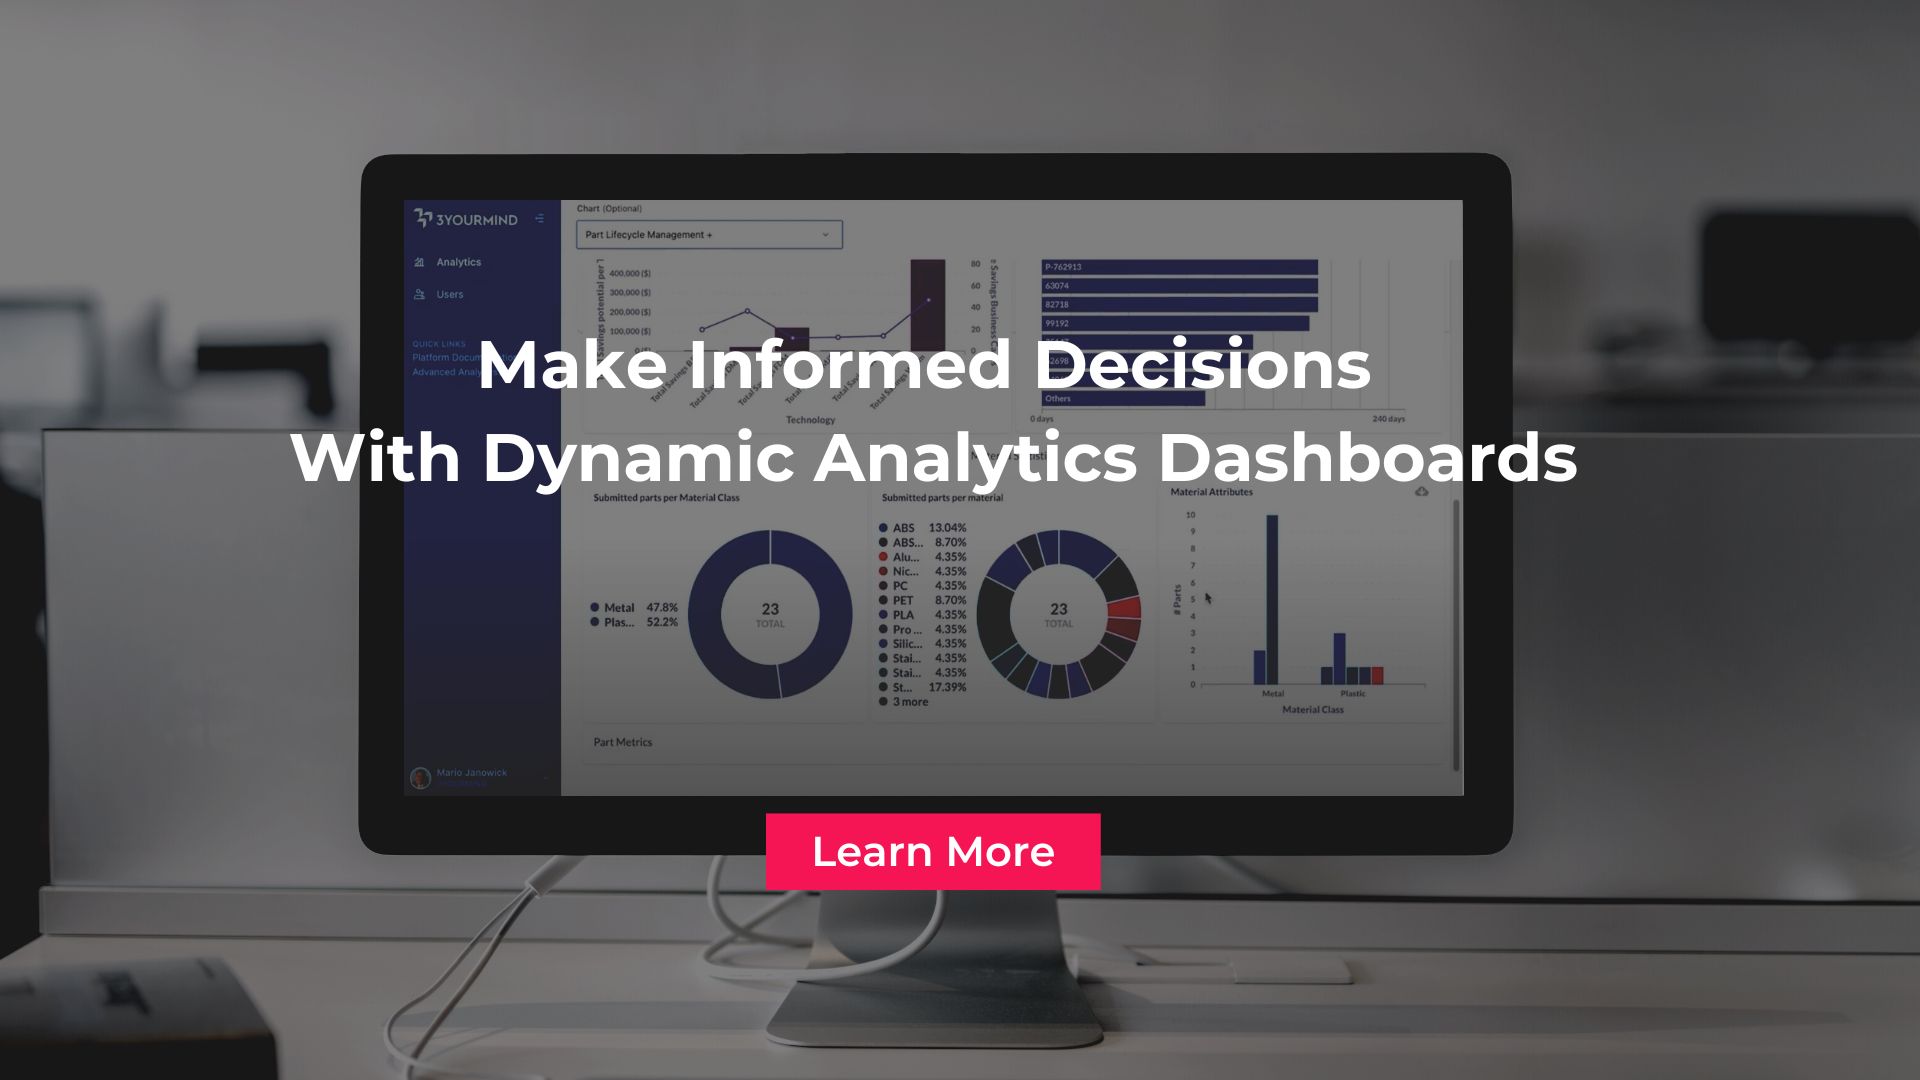 We Offer Powerful Analytics to Drive Informed Decision Making